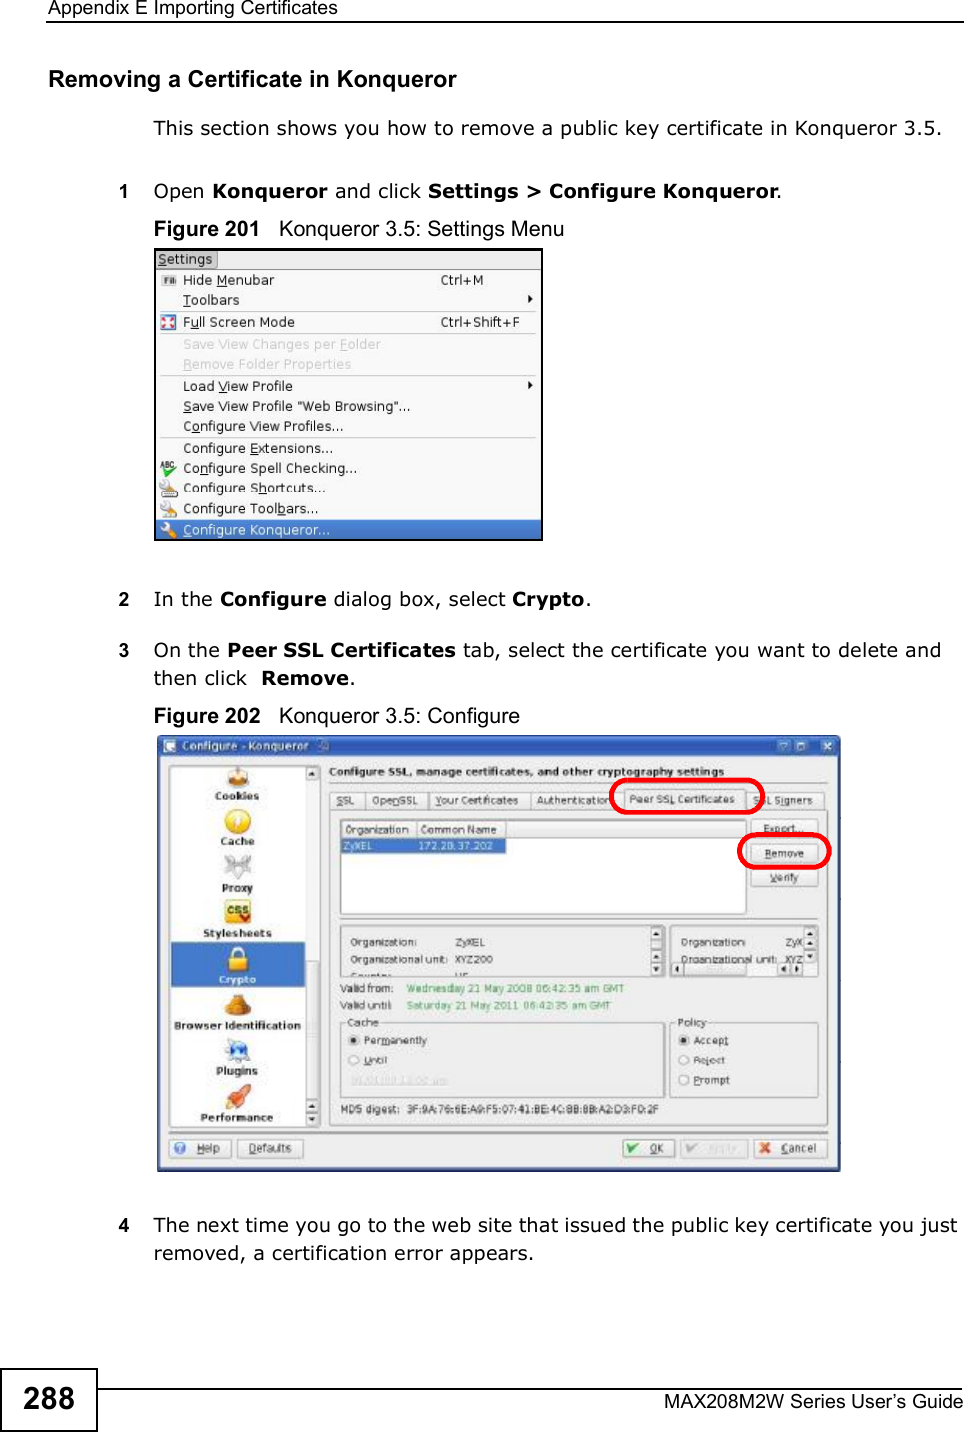 Appendix EImporting CertificatesMAX208M2W Series User s Guide288Removing a Certificate in KonquerorThis section shows you how to remove a public key certificate in Konqueror 3.5.1Open Konqueror and click Settings &gt; Configure Konqueror.Figure 201   Konqueror 3.5: Settings Menu2In the Configure dialog box, select Crypto. 3On the Peer SSL Certificates tab, select the certificate you want to delete and then click  Remove.Figure 202   Konqueror 3.5: Configure4The next time you go to the web site that issued the public key certificate you just removed, a certification error appears.